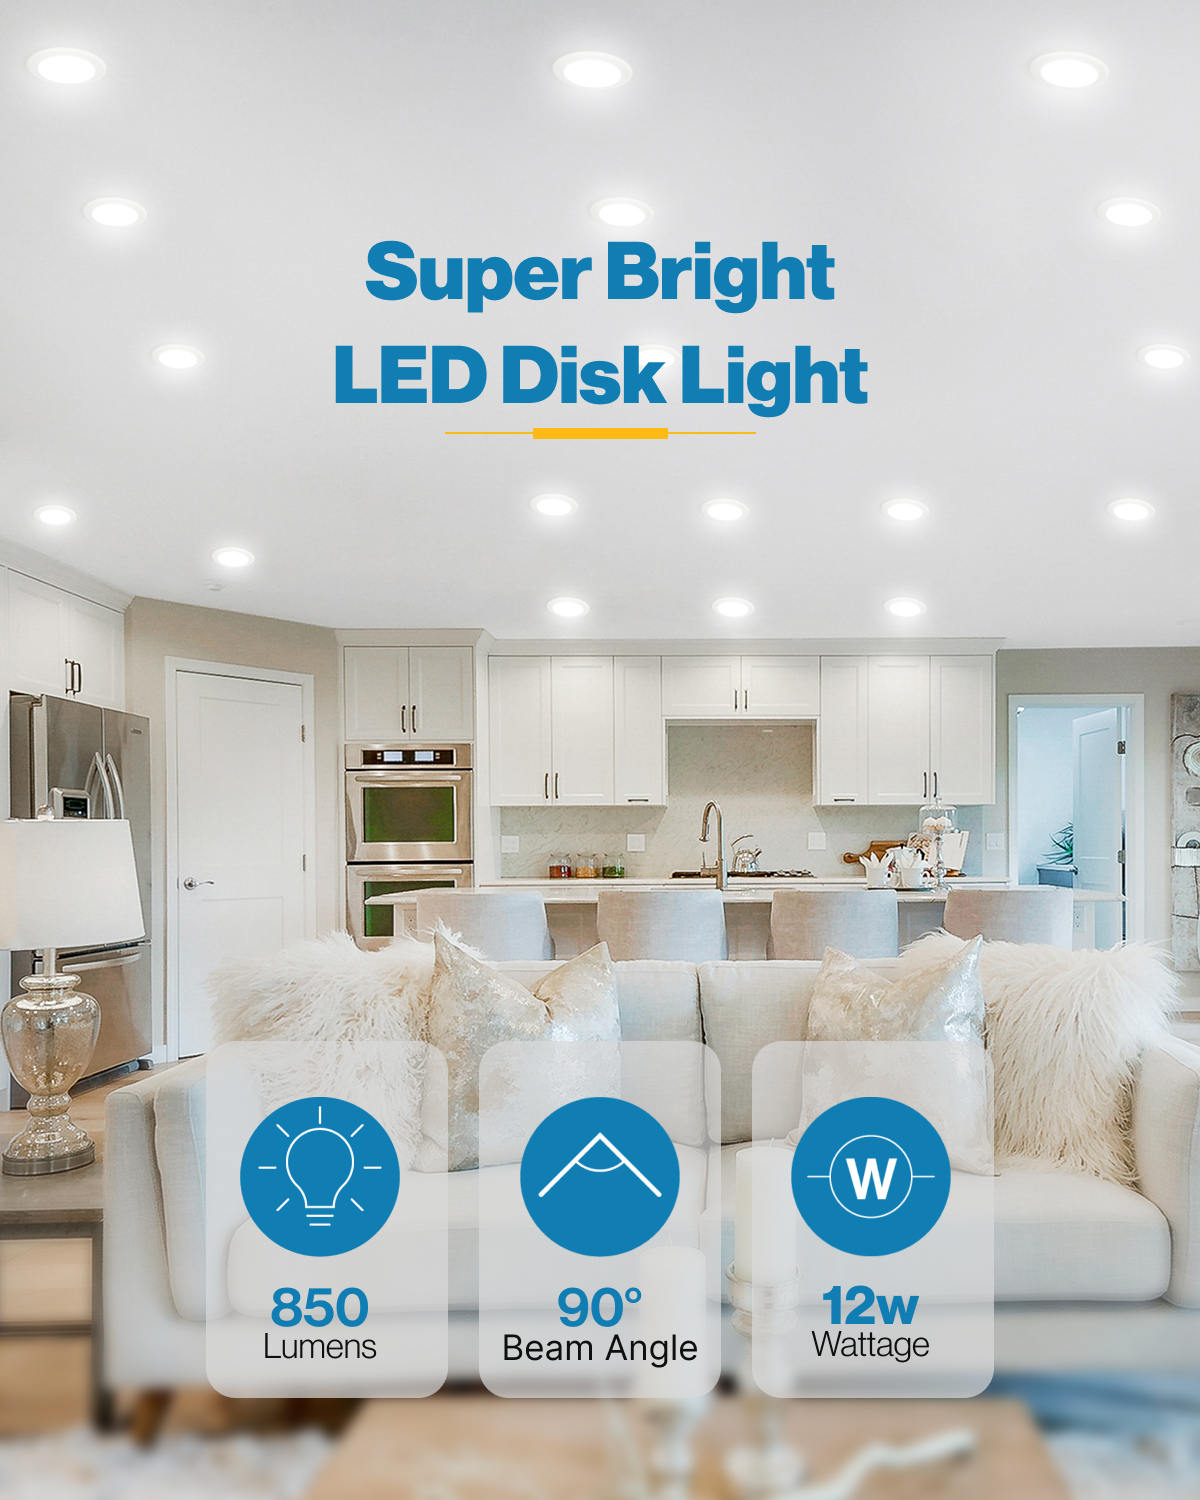 Our LED recessed lights give off sunlight-like quality (CRI90+) for true color rendering. Ideal applications include bedroom, kitchen, living areas, hallways, and offices.